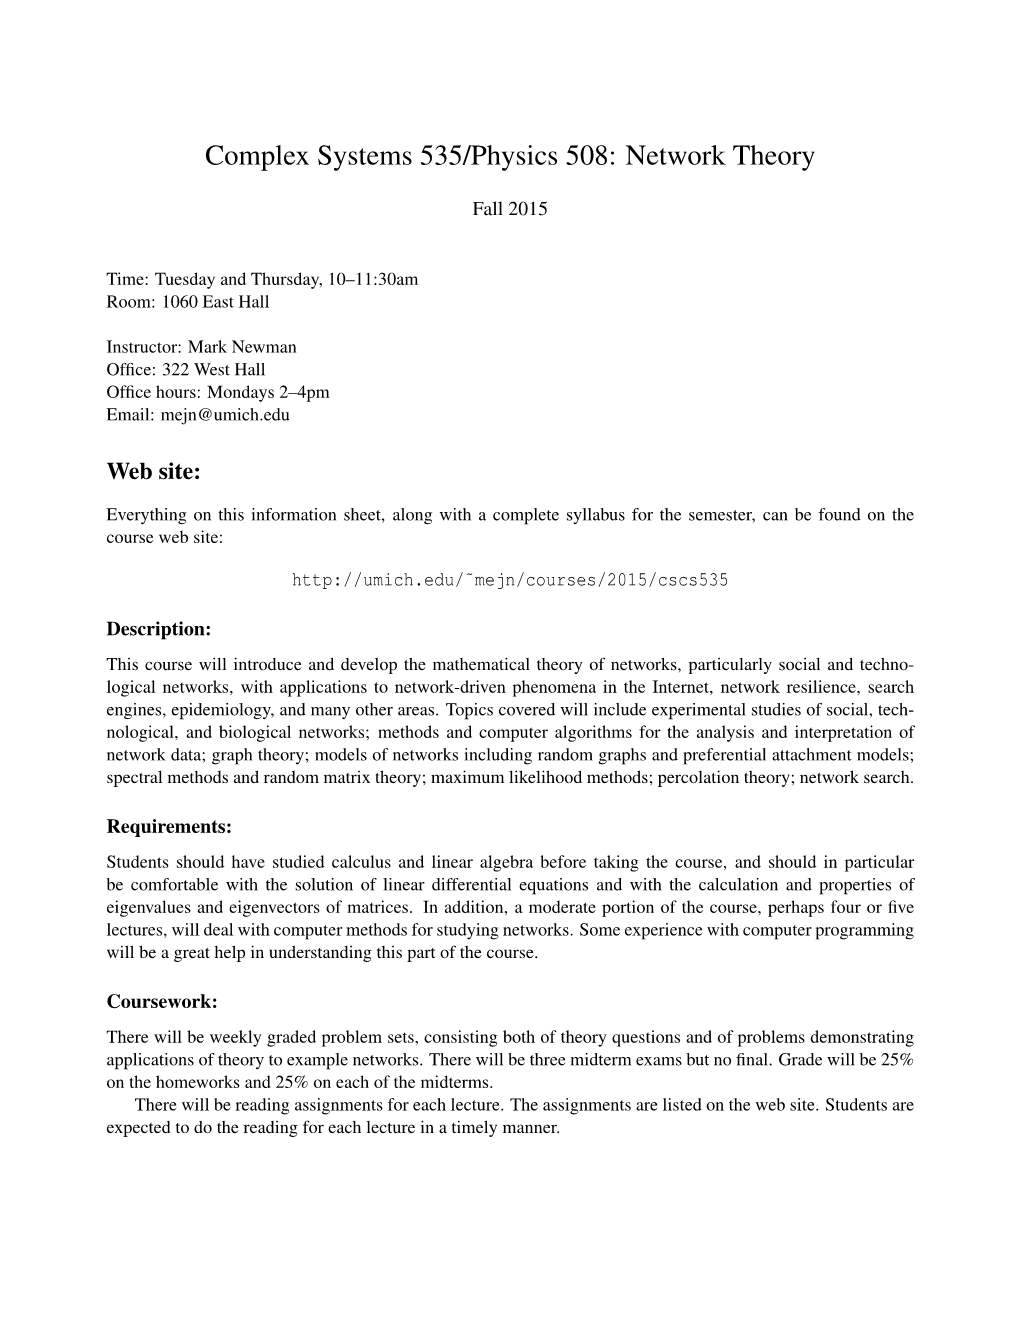 Complex Systems 535/Physics 508: Network Theory